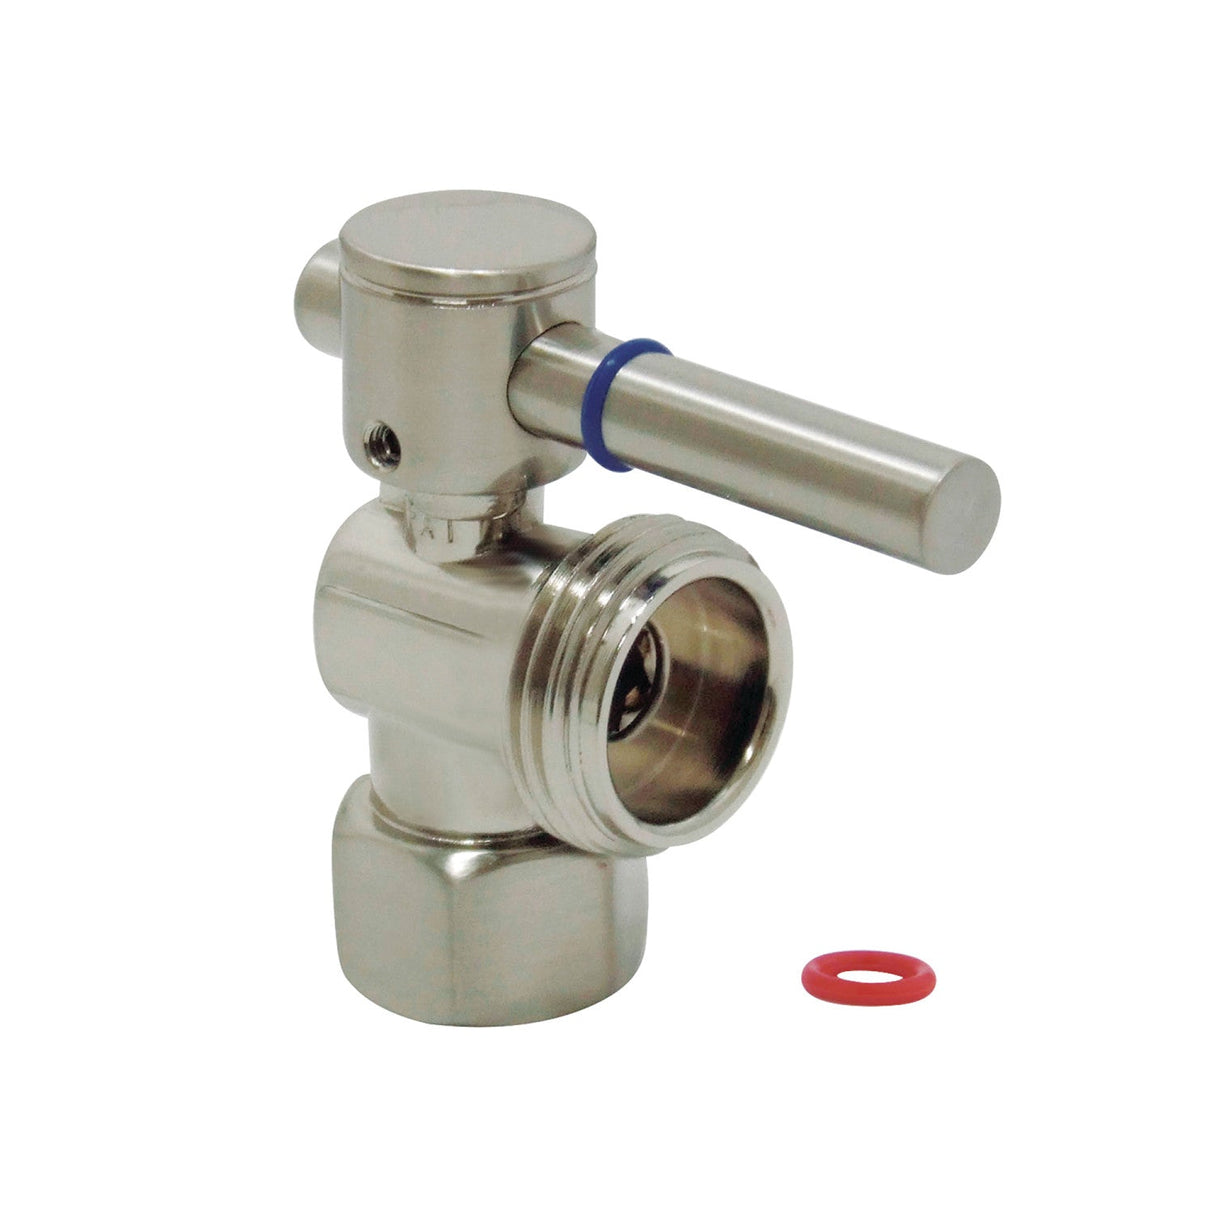 Fauceture CC13008DL 1/2-Inch FIP x 3/4-Inch Hose Thread Quarter-Turn Angle Stop Valve, Brushed Nickel